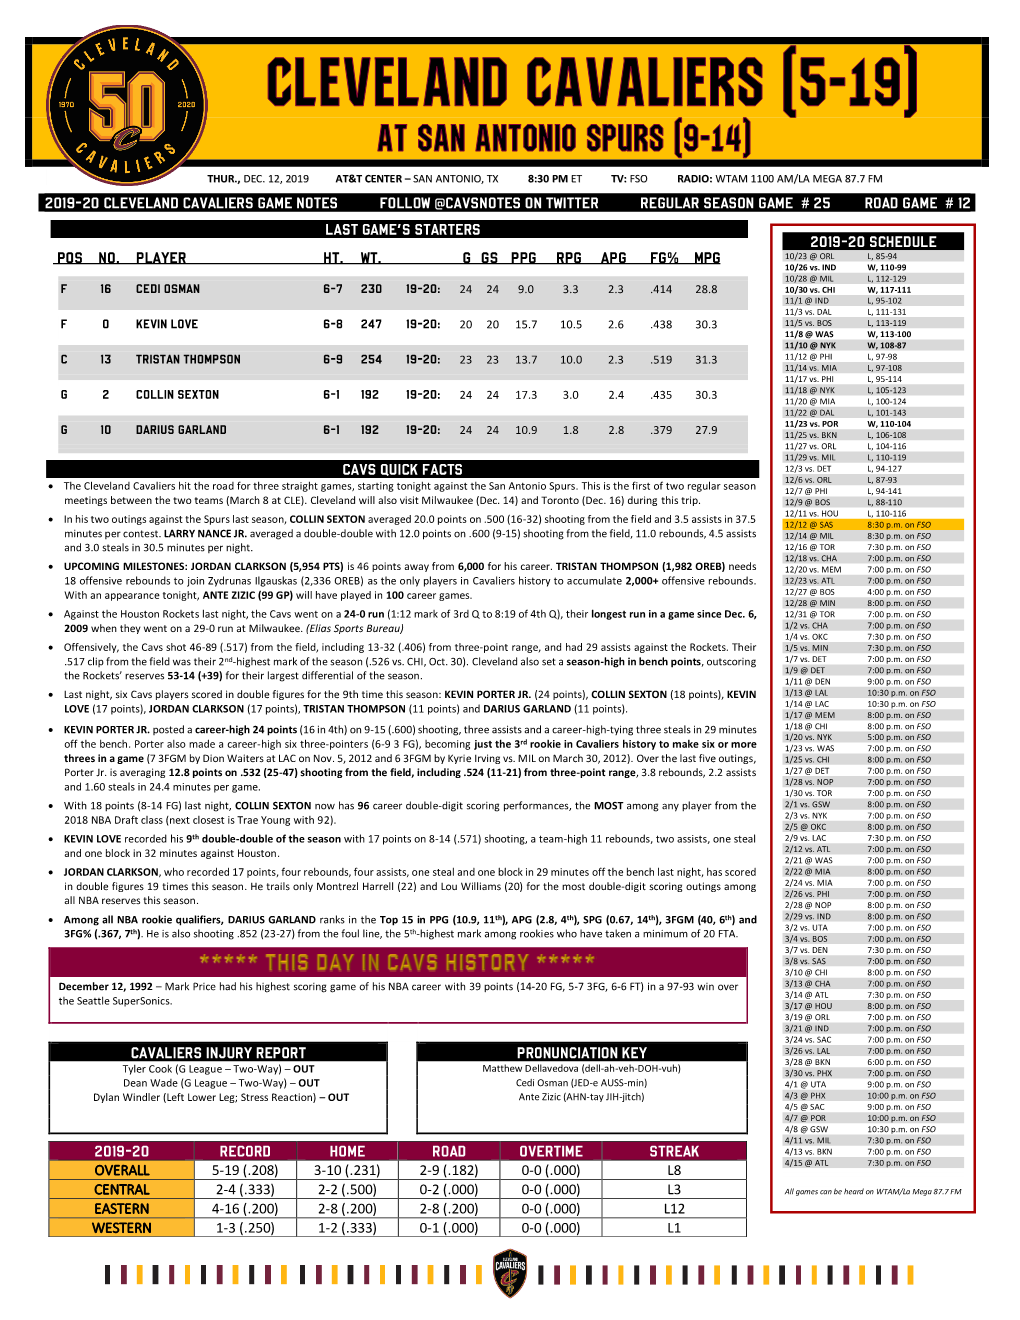 2019-20 Cleveland Cavaliers Game Notes Follow @Cavsnotes on Twitter Regular Season Game # 25 Road Game # 12